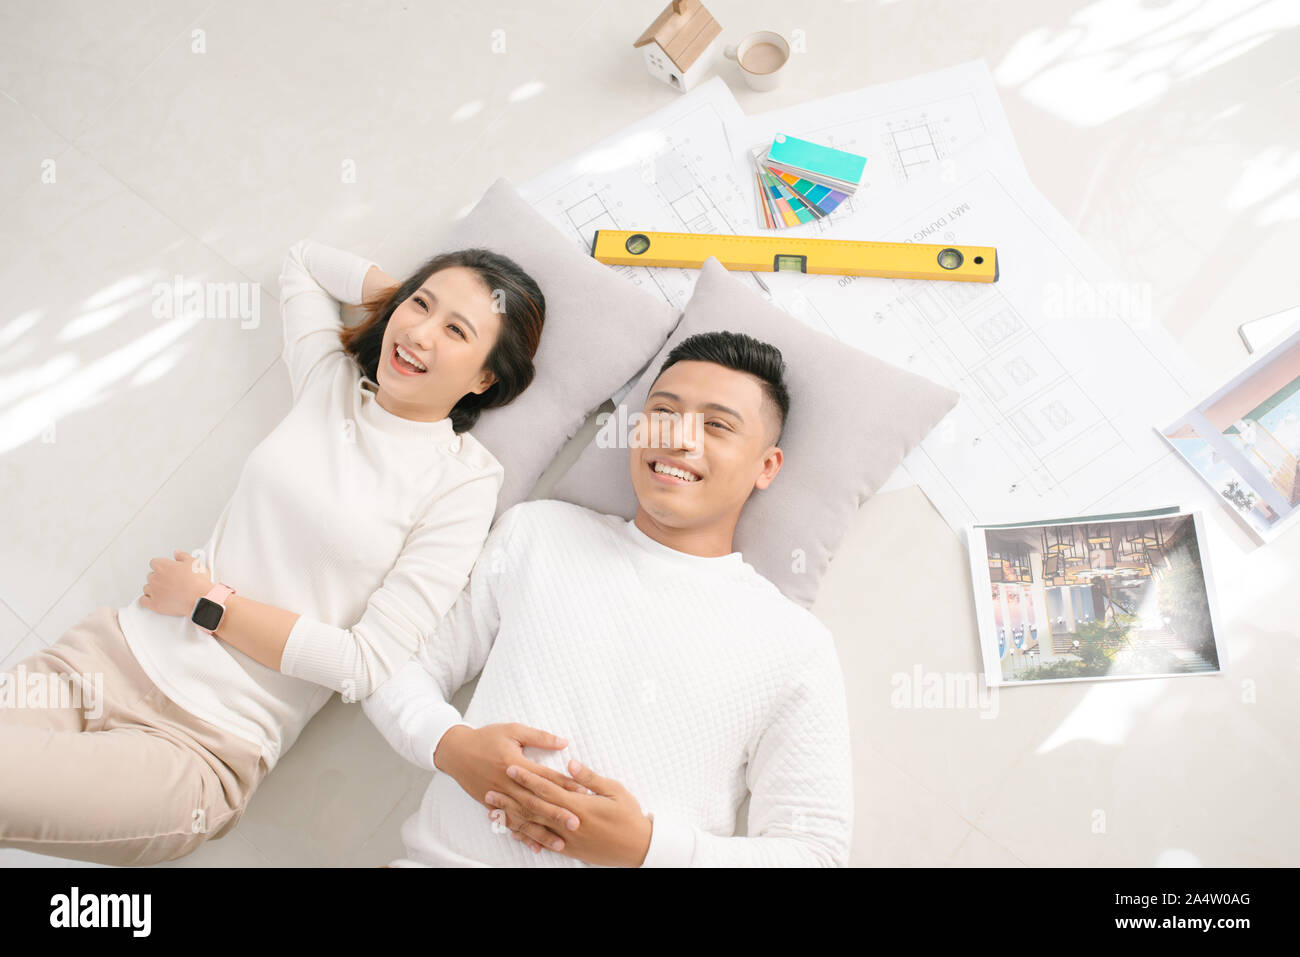 A young couple lying on the floor of their new home, think about their new interior decoration Stock Photo